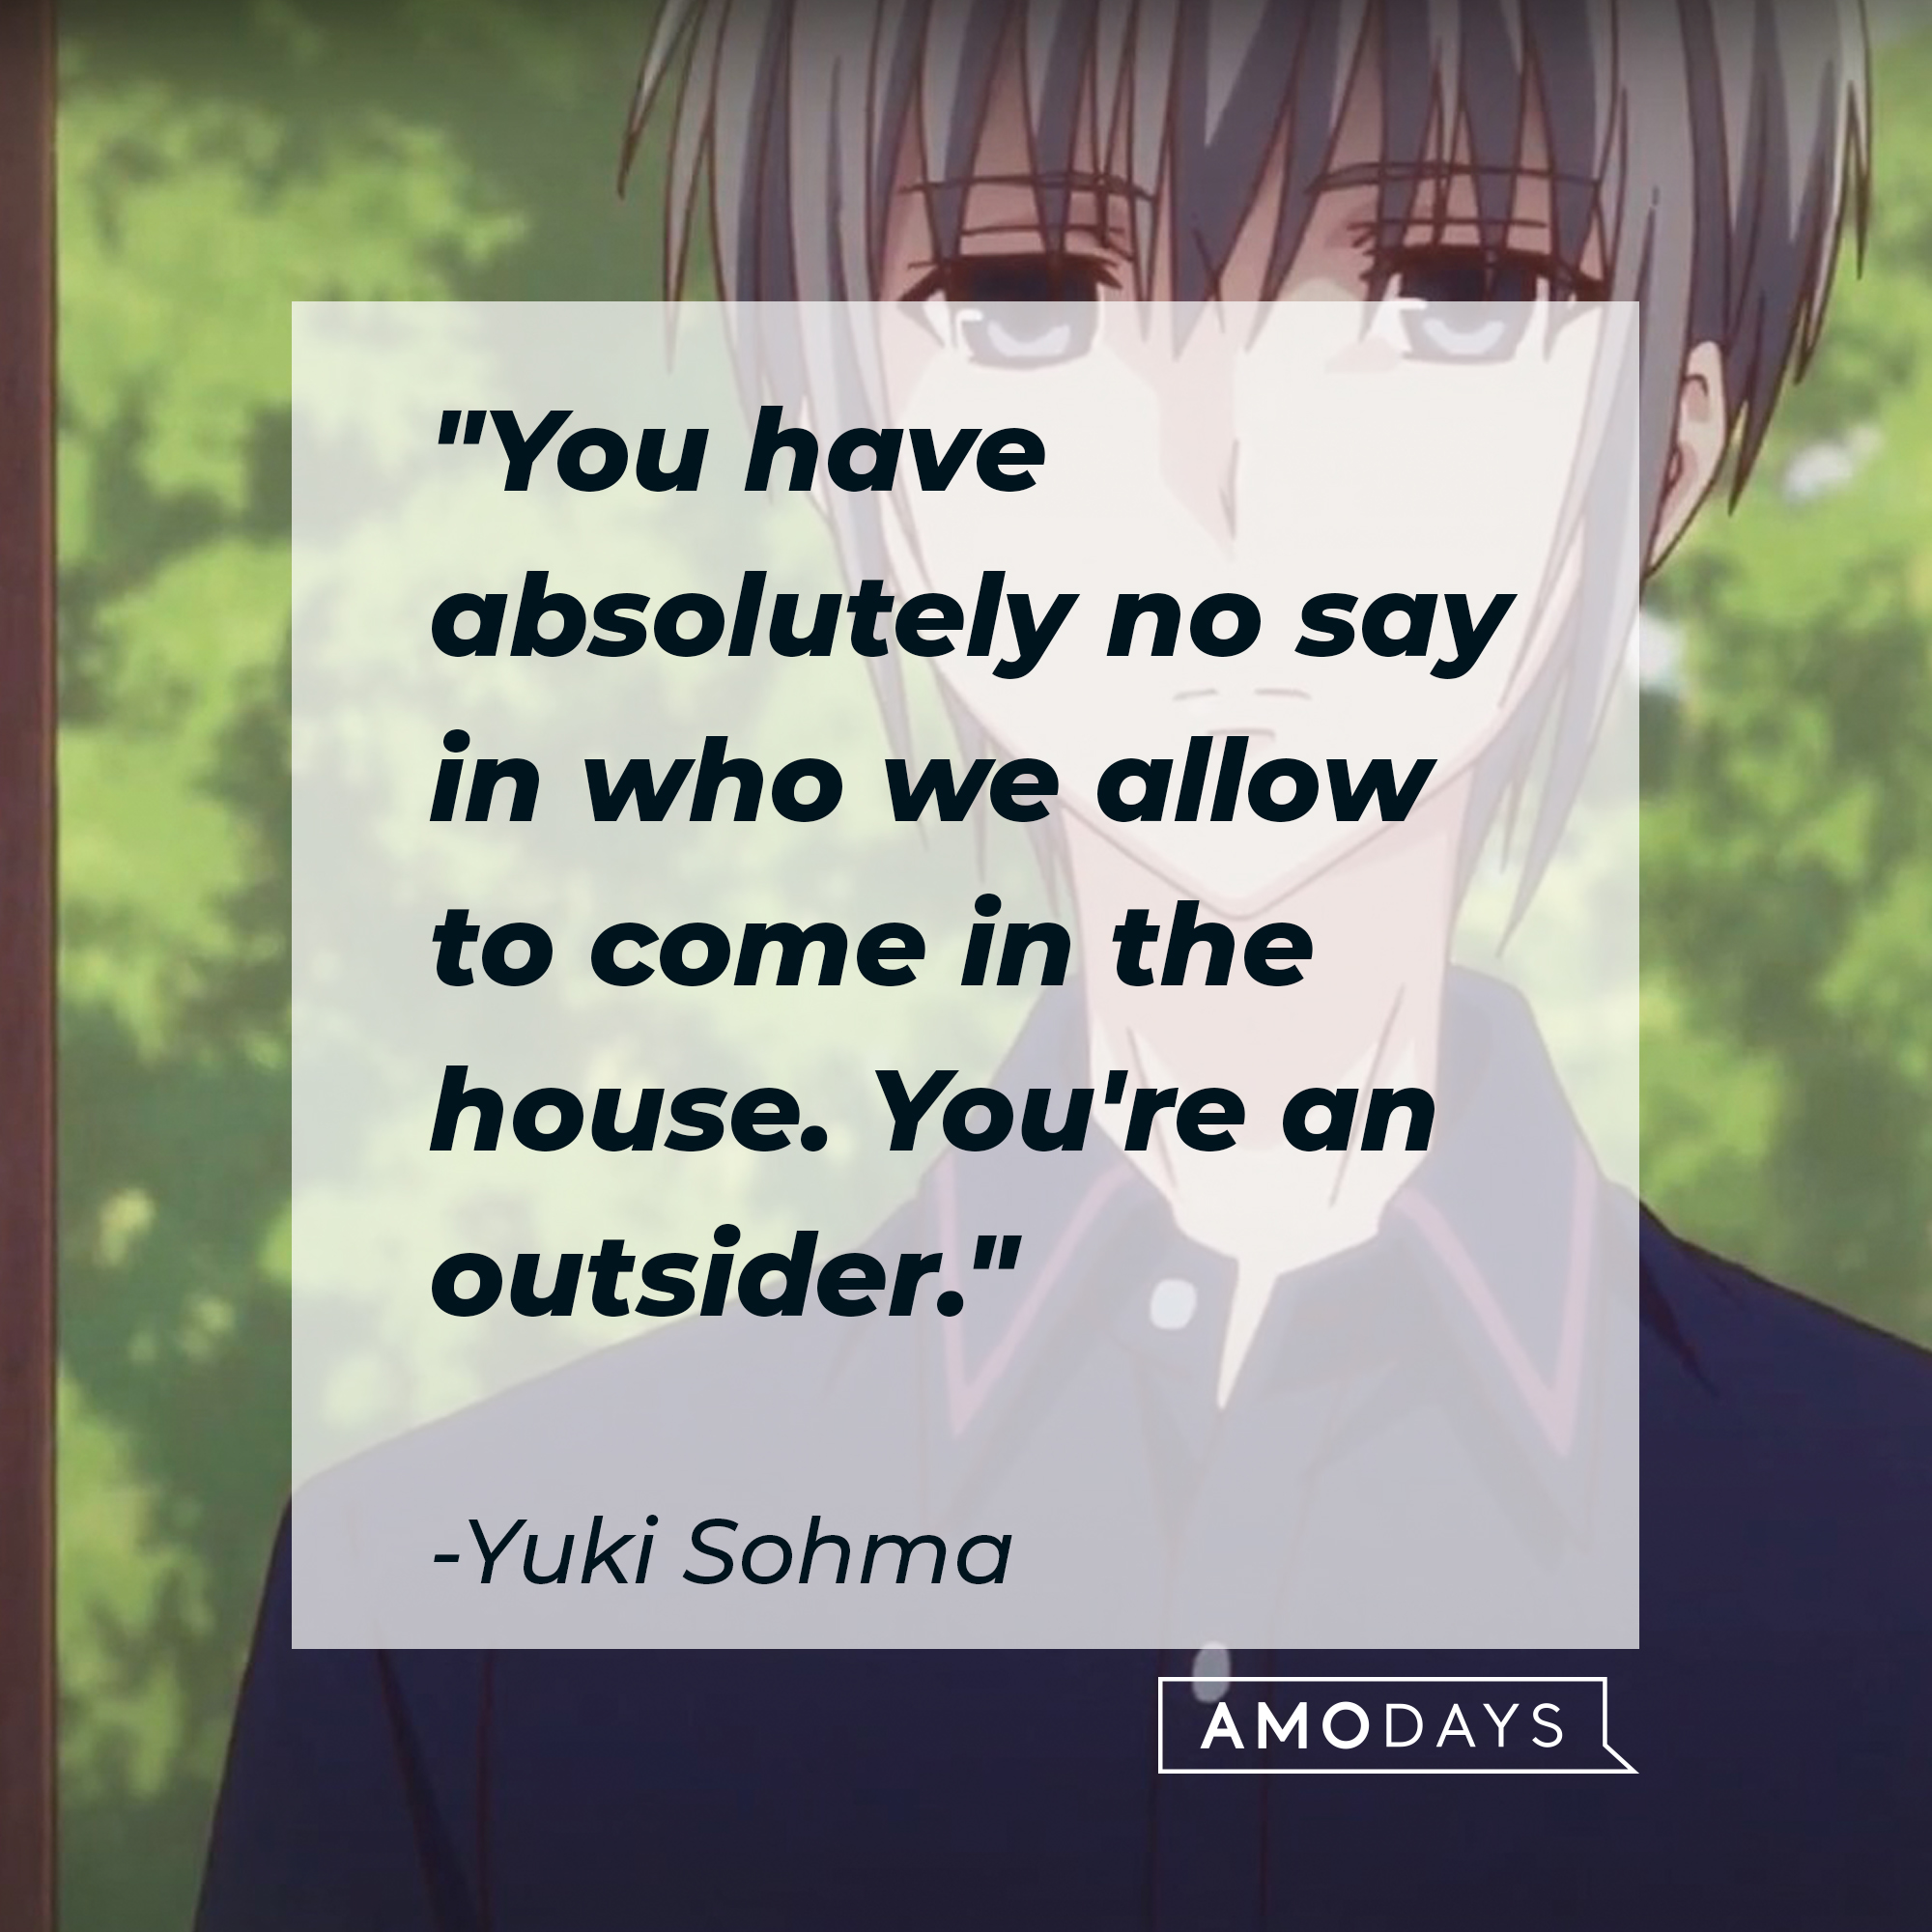 Yuki Sohma's quote: "You have absolutely no say in who we allow to come in the house. You're an outsider." | Source: Facebook.com/FruitsBasketOfficial